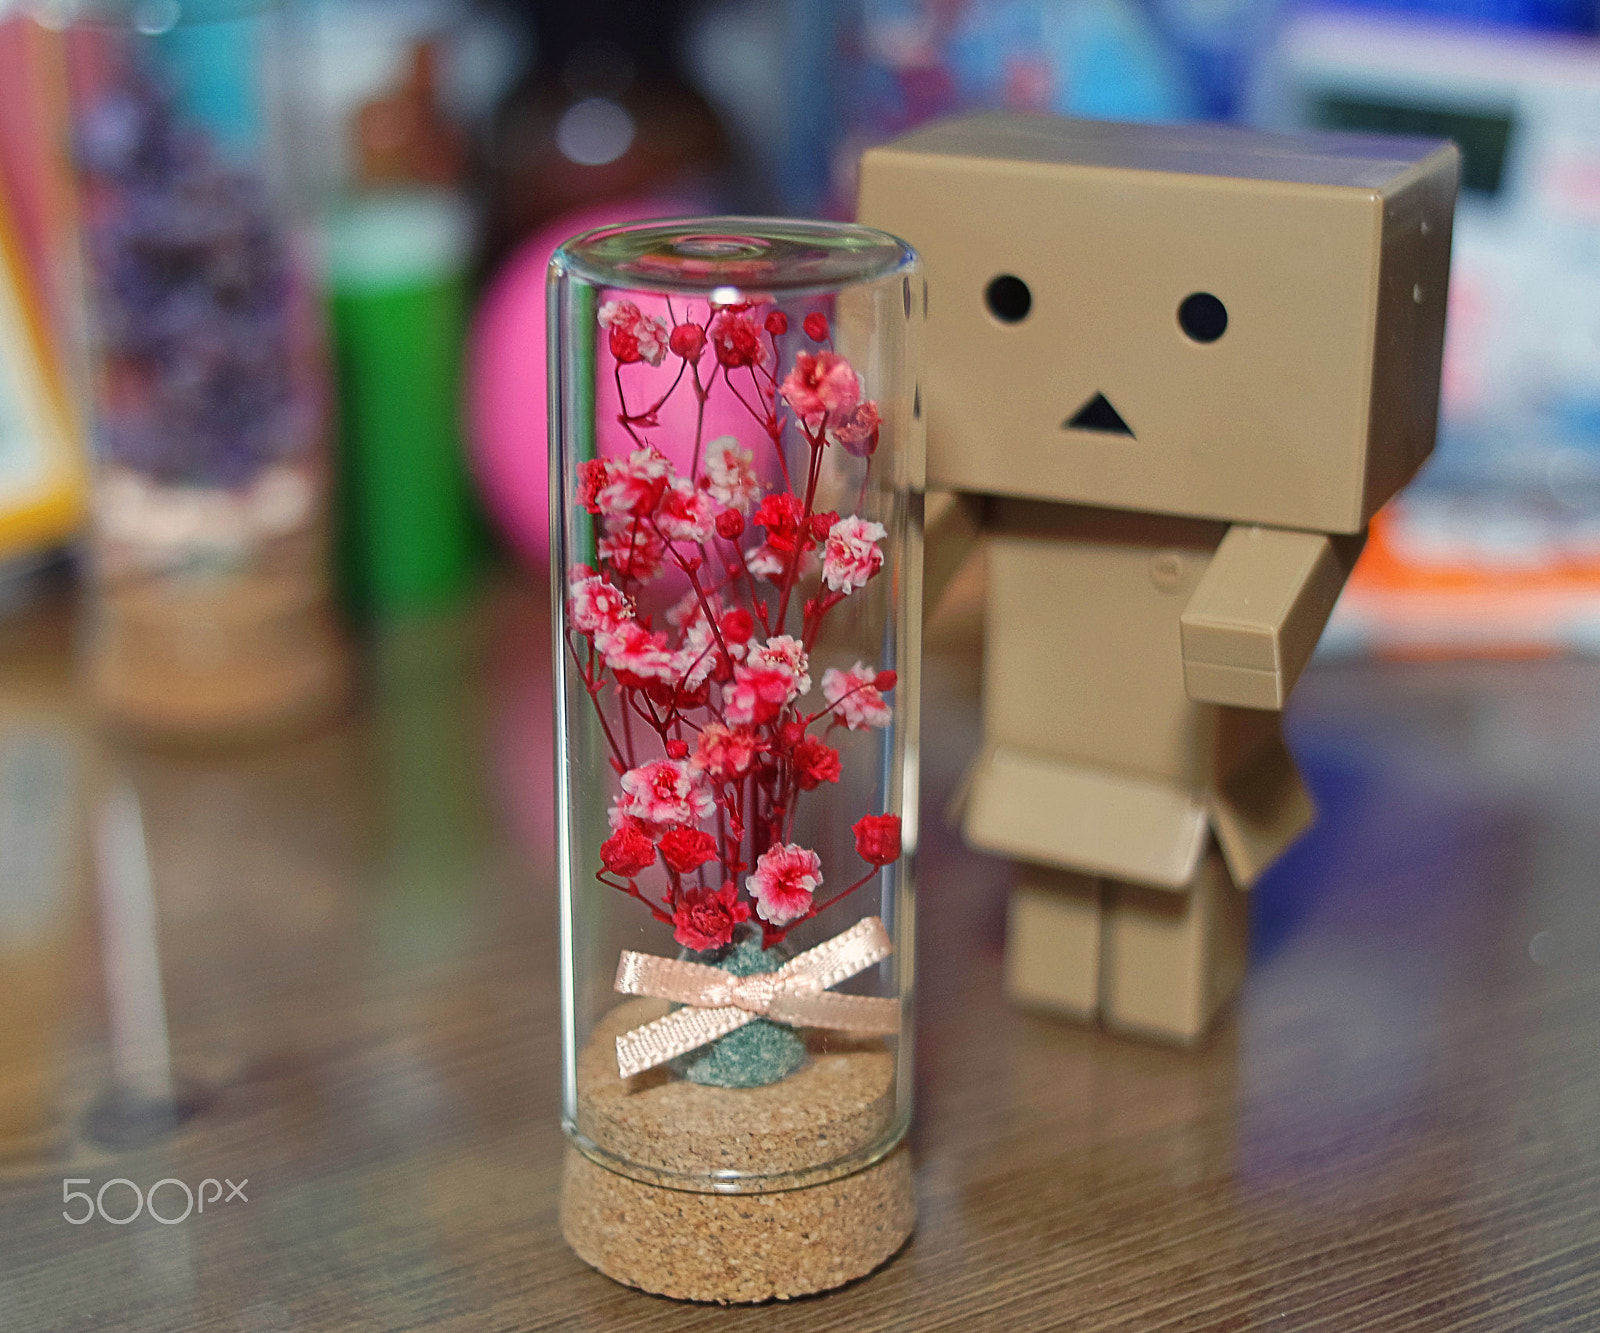 NX 30mm F2 sample photo. Preserved flower photography